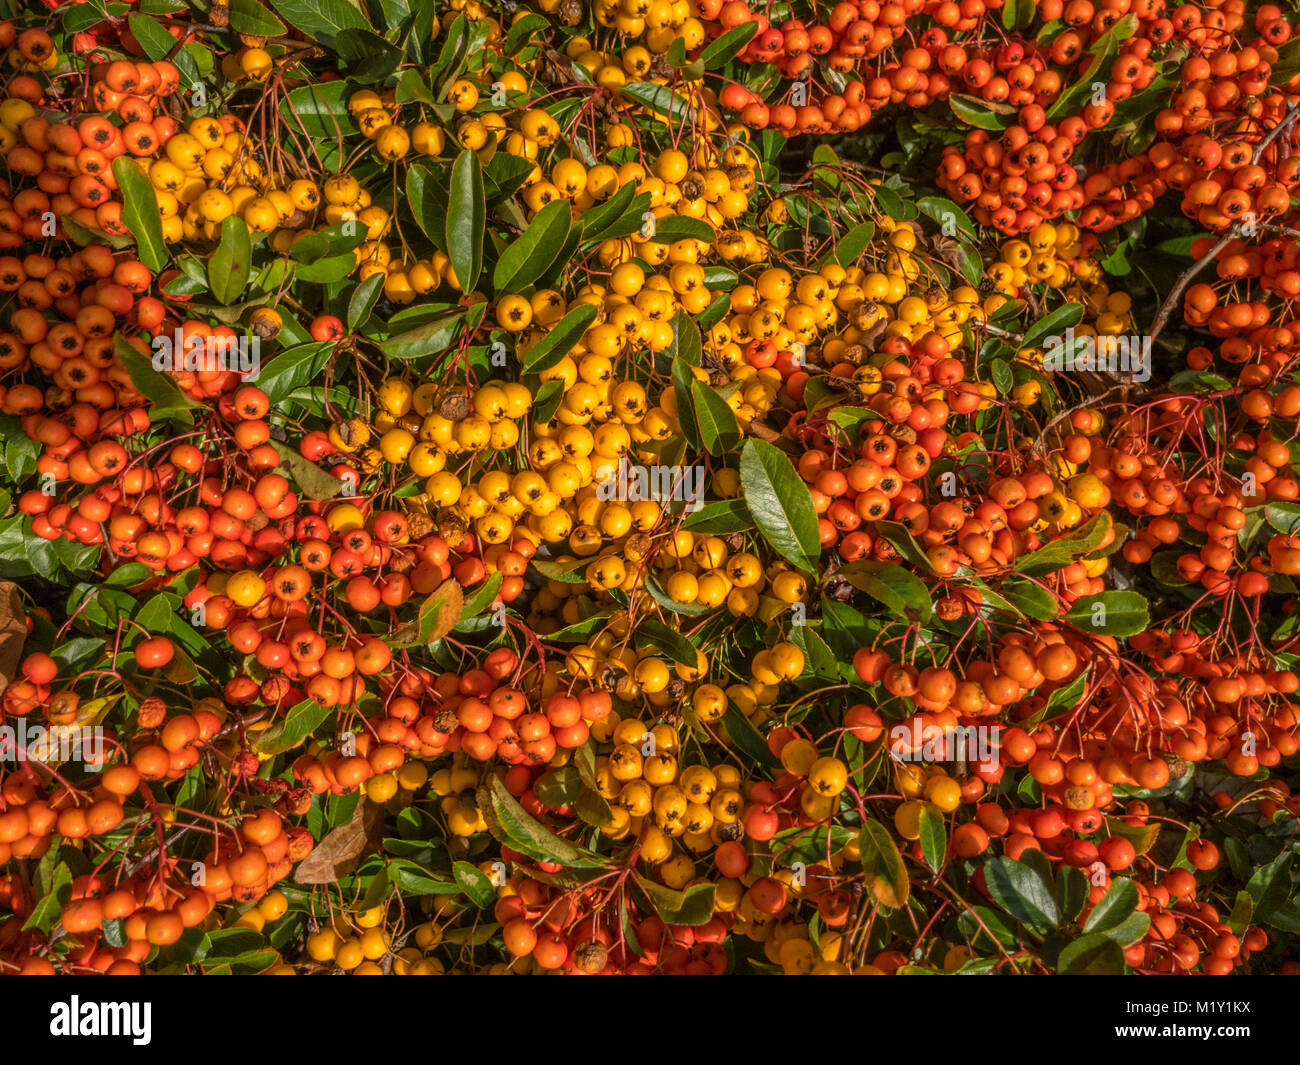 Close up shot of an abundance of winter berries on a garden shrub.  The berries are both yellow and orange and very vibrant in colour. Stock Photo